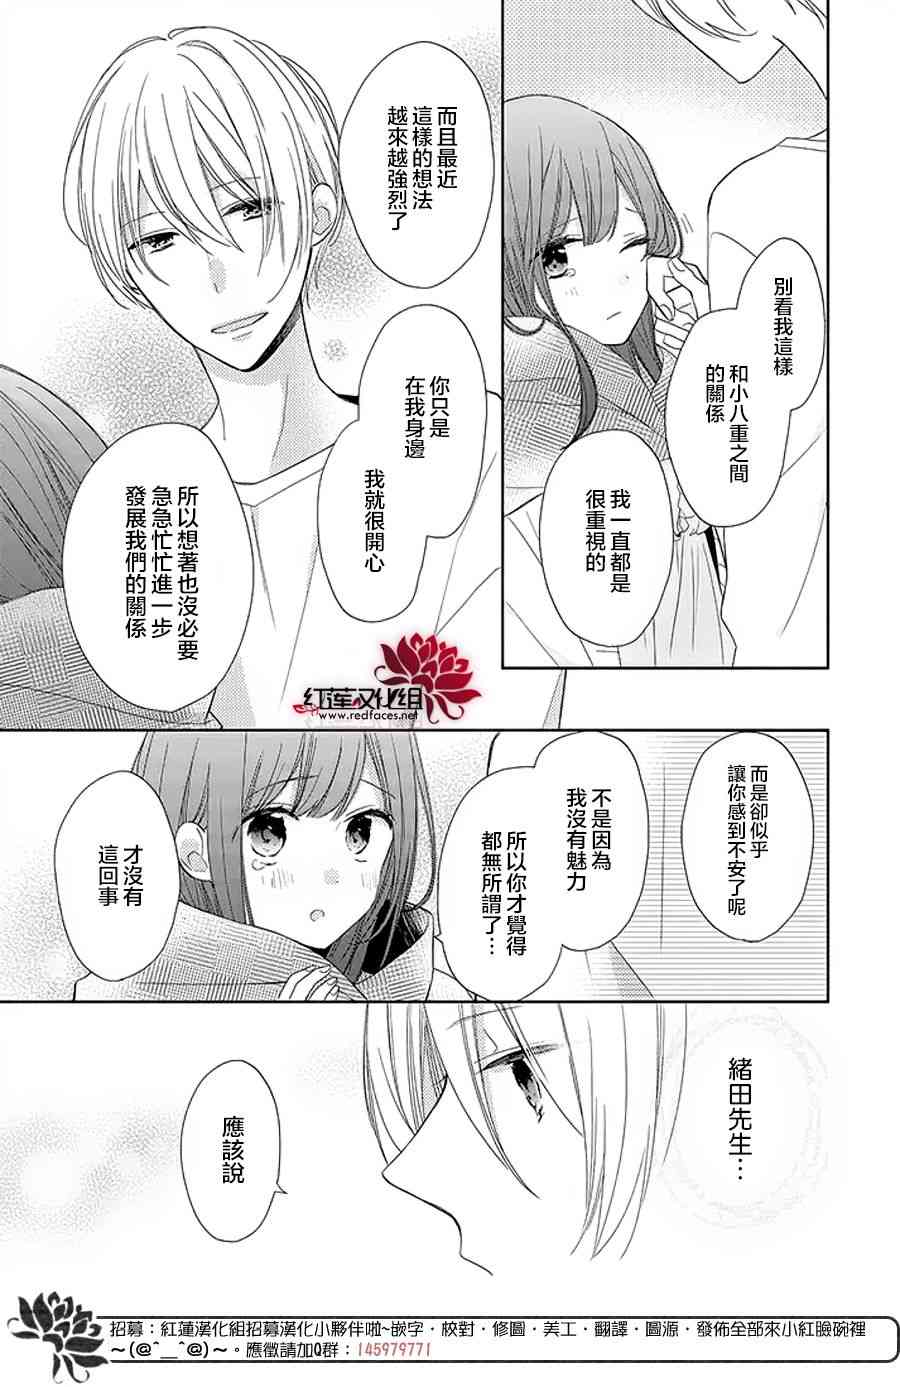 If given a second chance - 14話 - 3